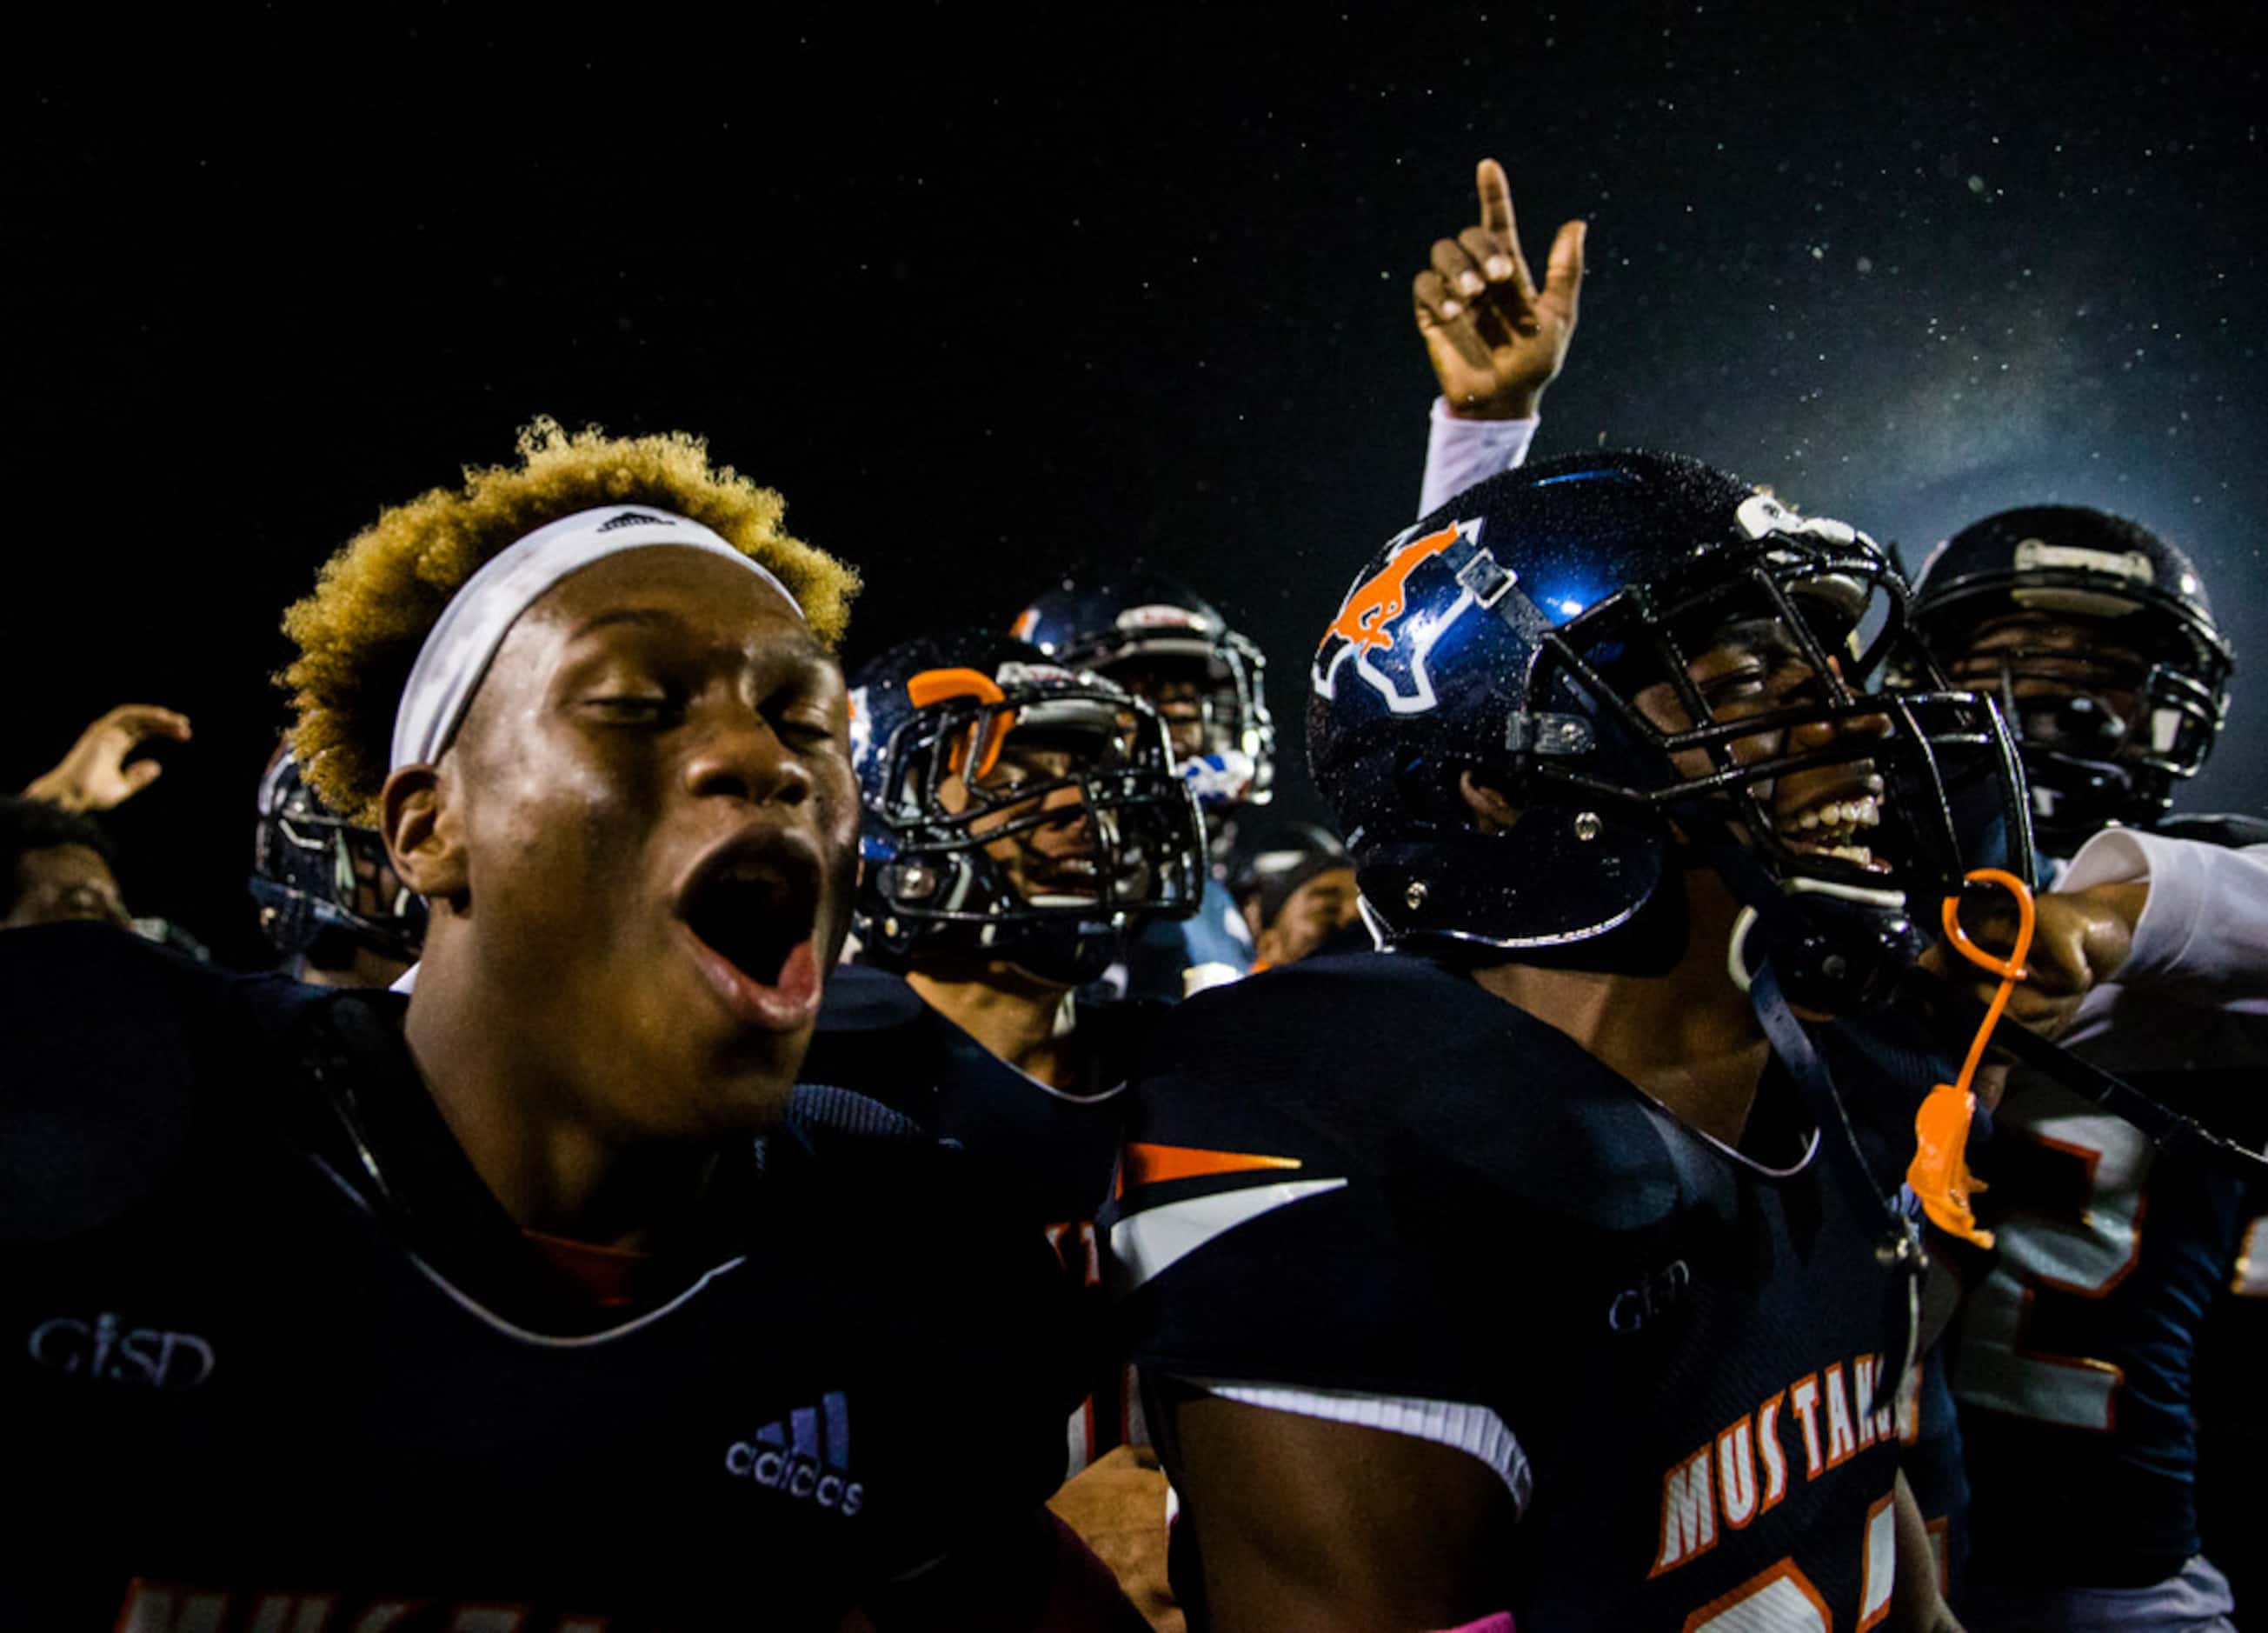 Sachse celebrates a 17-14 win over Garland Lakeview on Thursday, October 24, 2019 at...